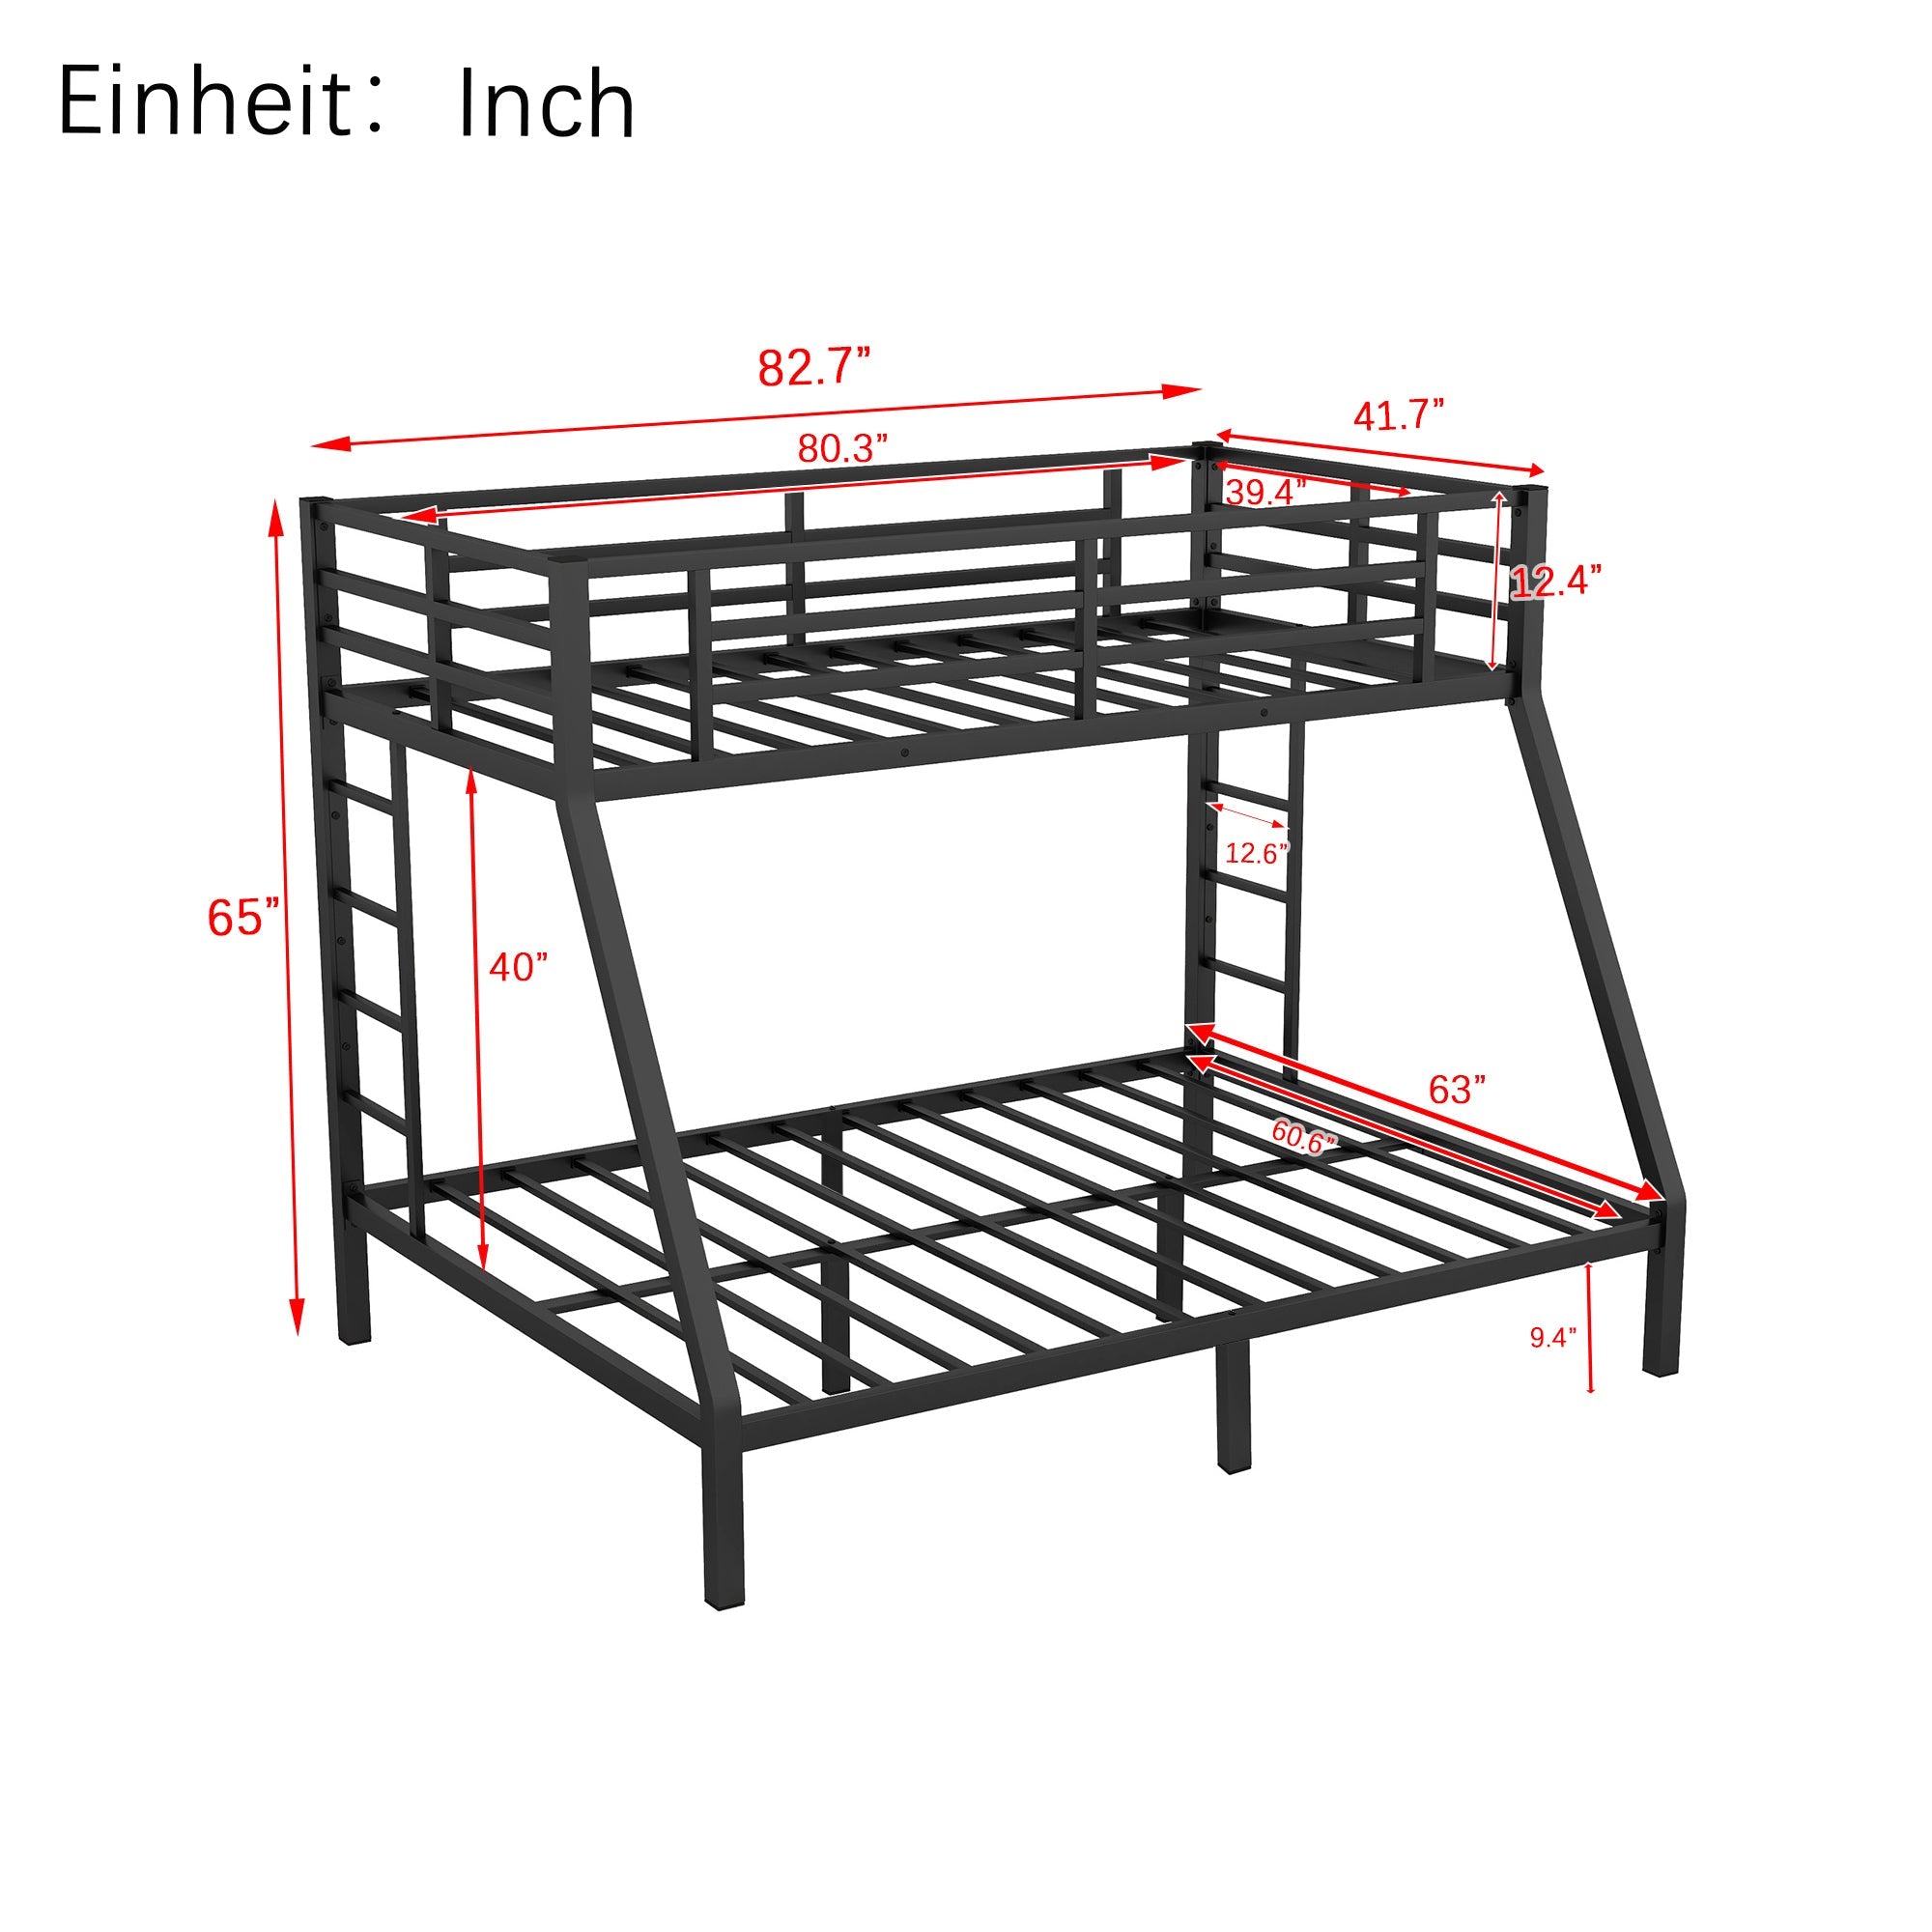 Metal Twin XL over Queen Bunk Bed – Space-Saver, Noise-Free, Teens/Adults